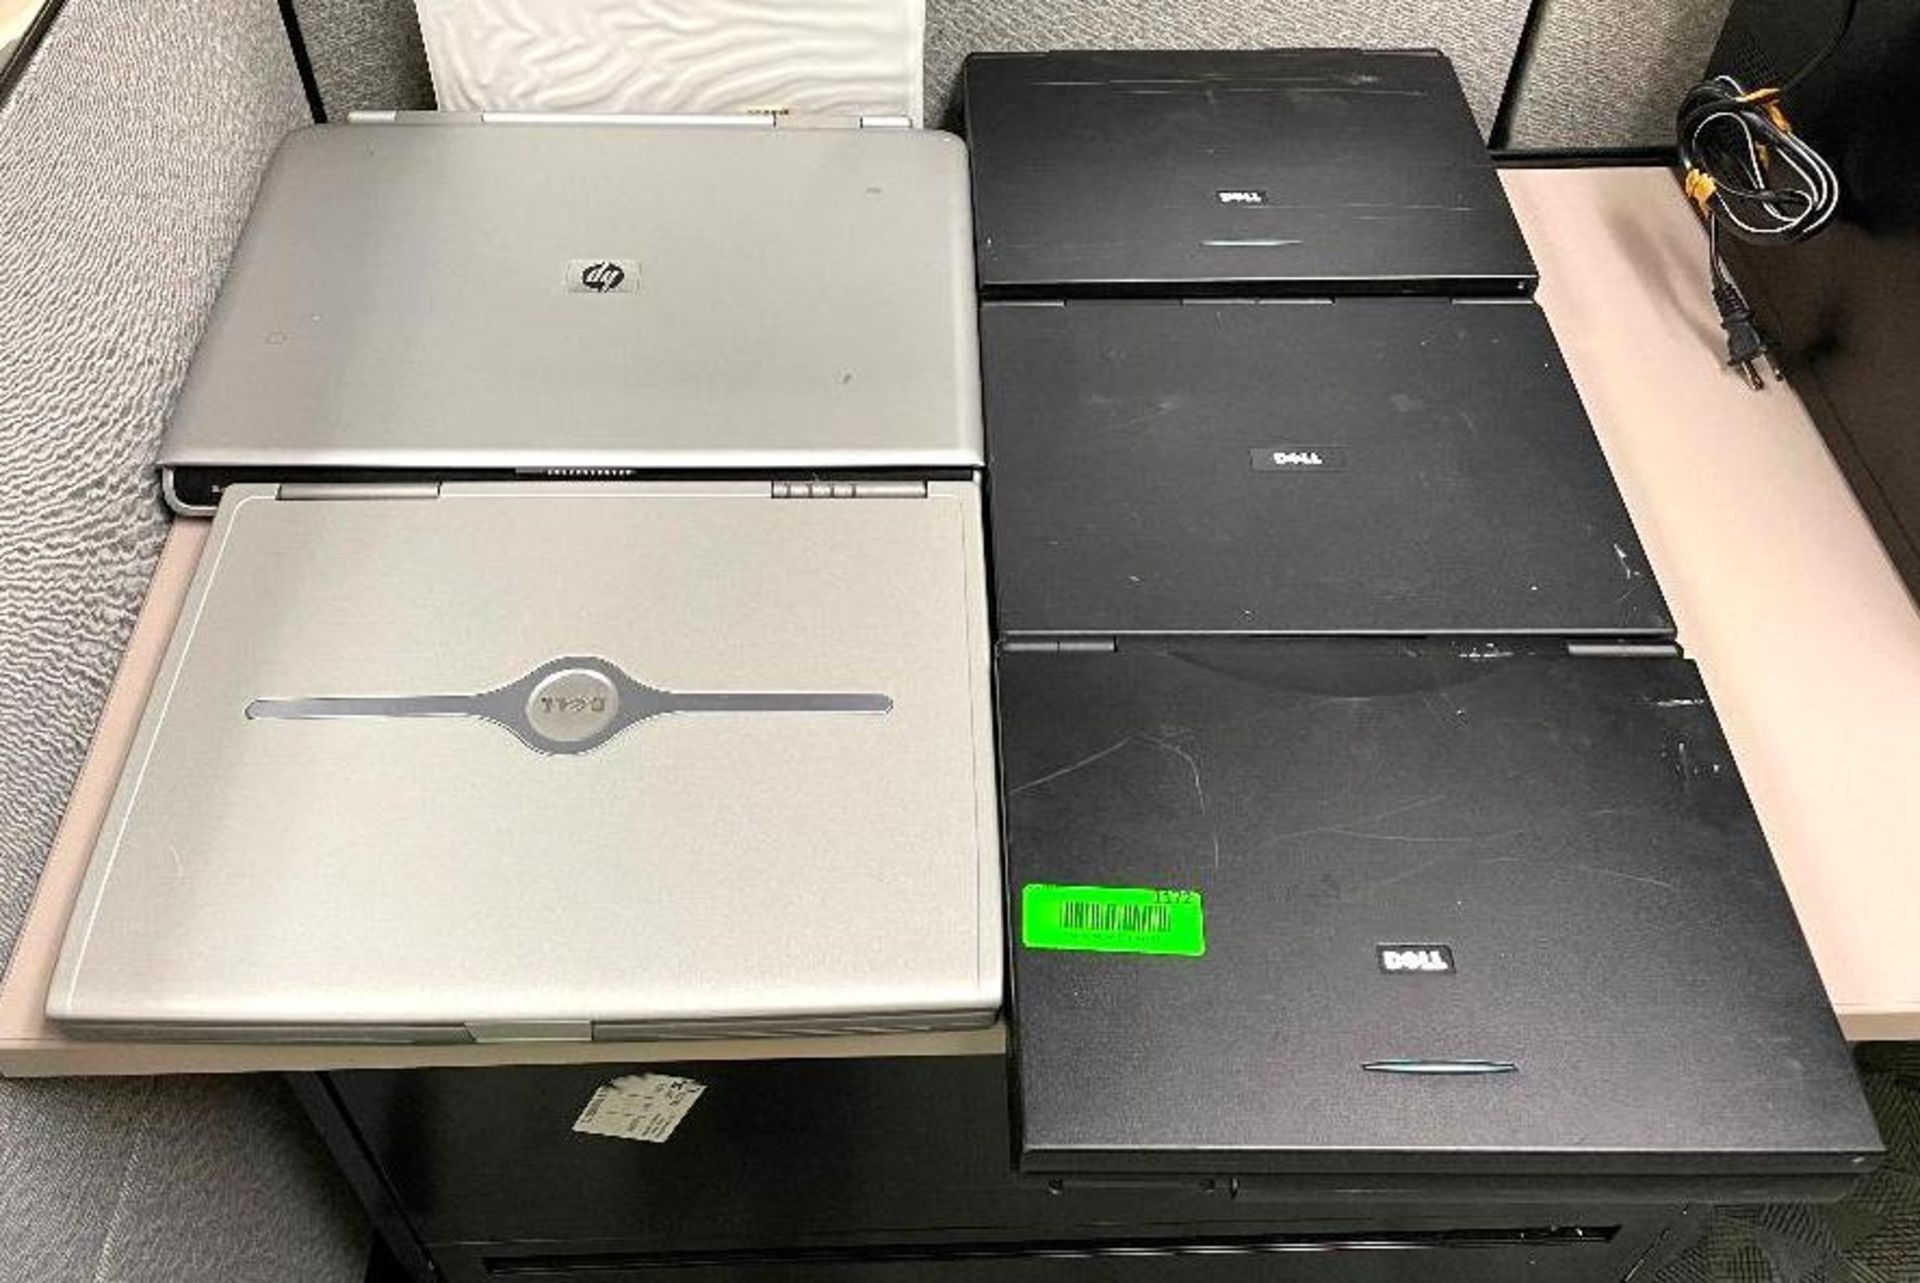 DESCRIPTION (5) VARIOUS LAPTOPS AS SHOWN ( NO POWER CORDS, CONDITION UNKNOWN) LOCATION FIRST FLOOR: